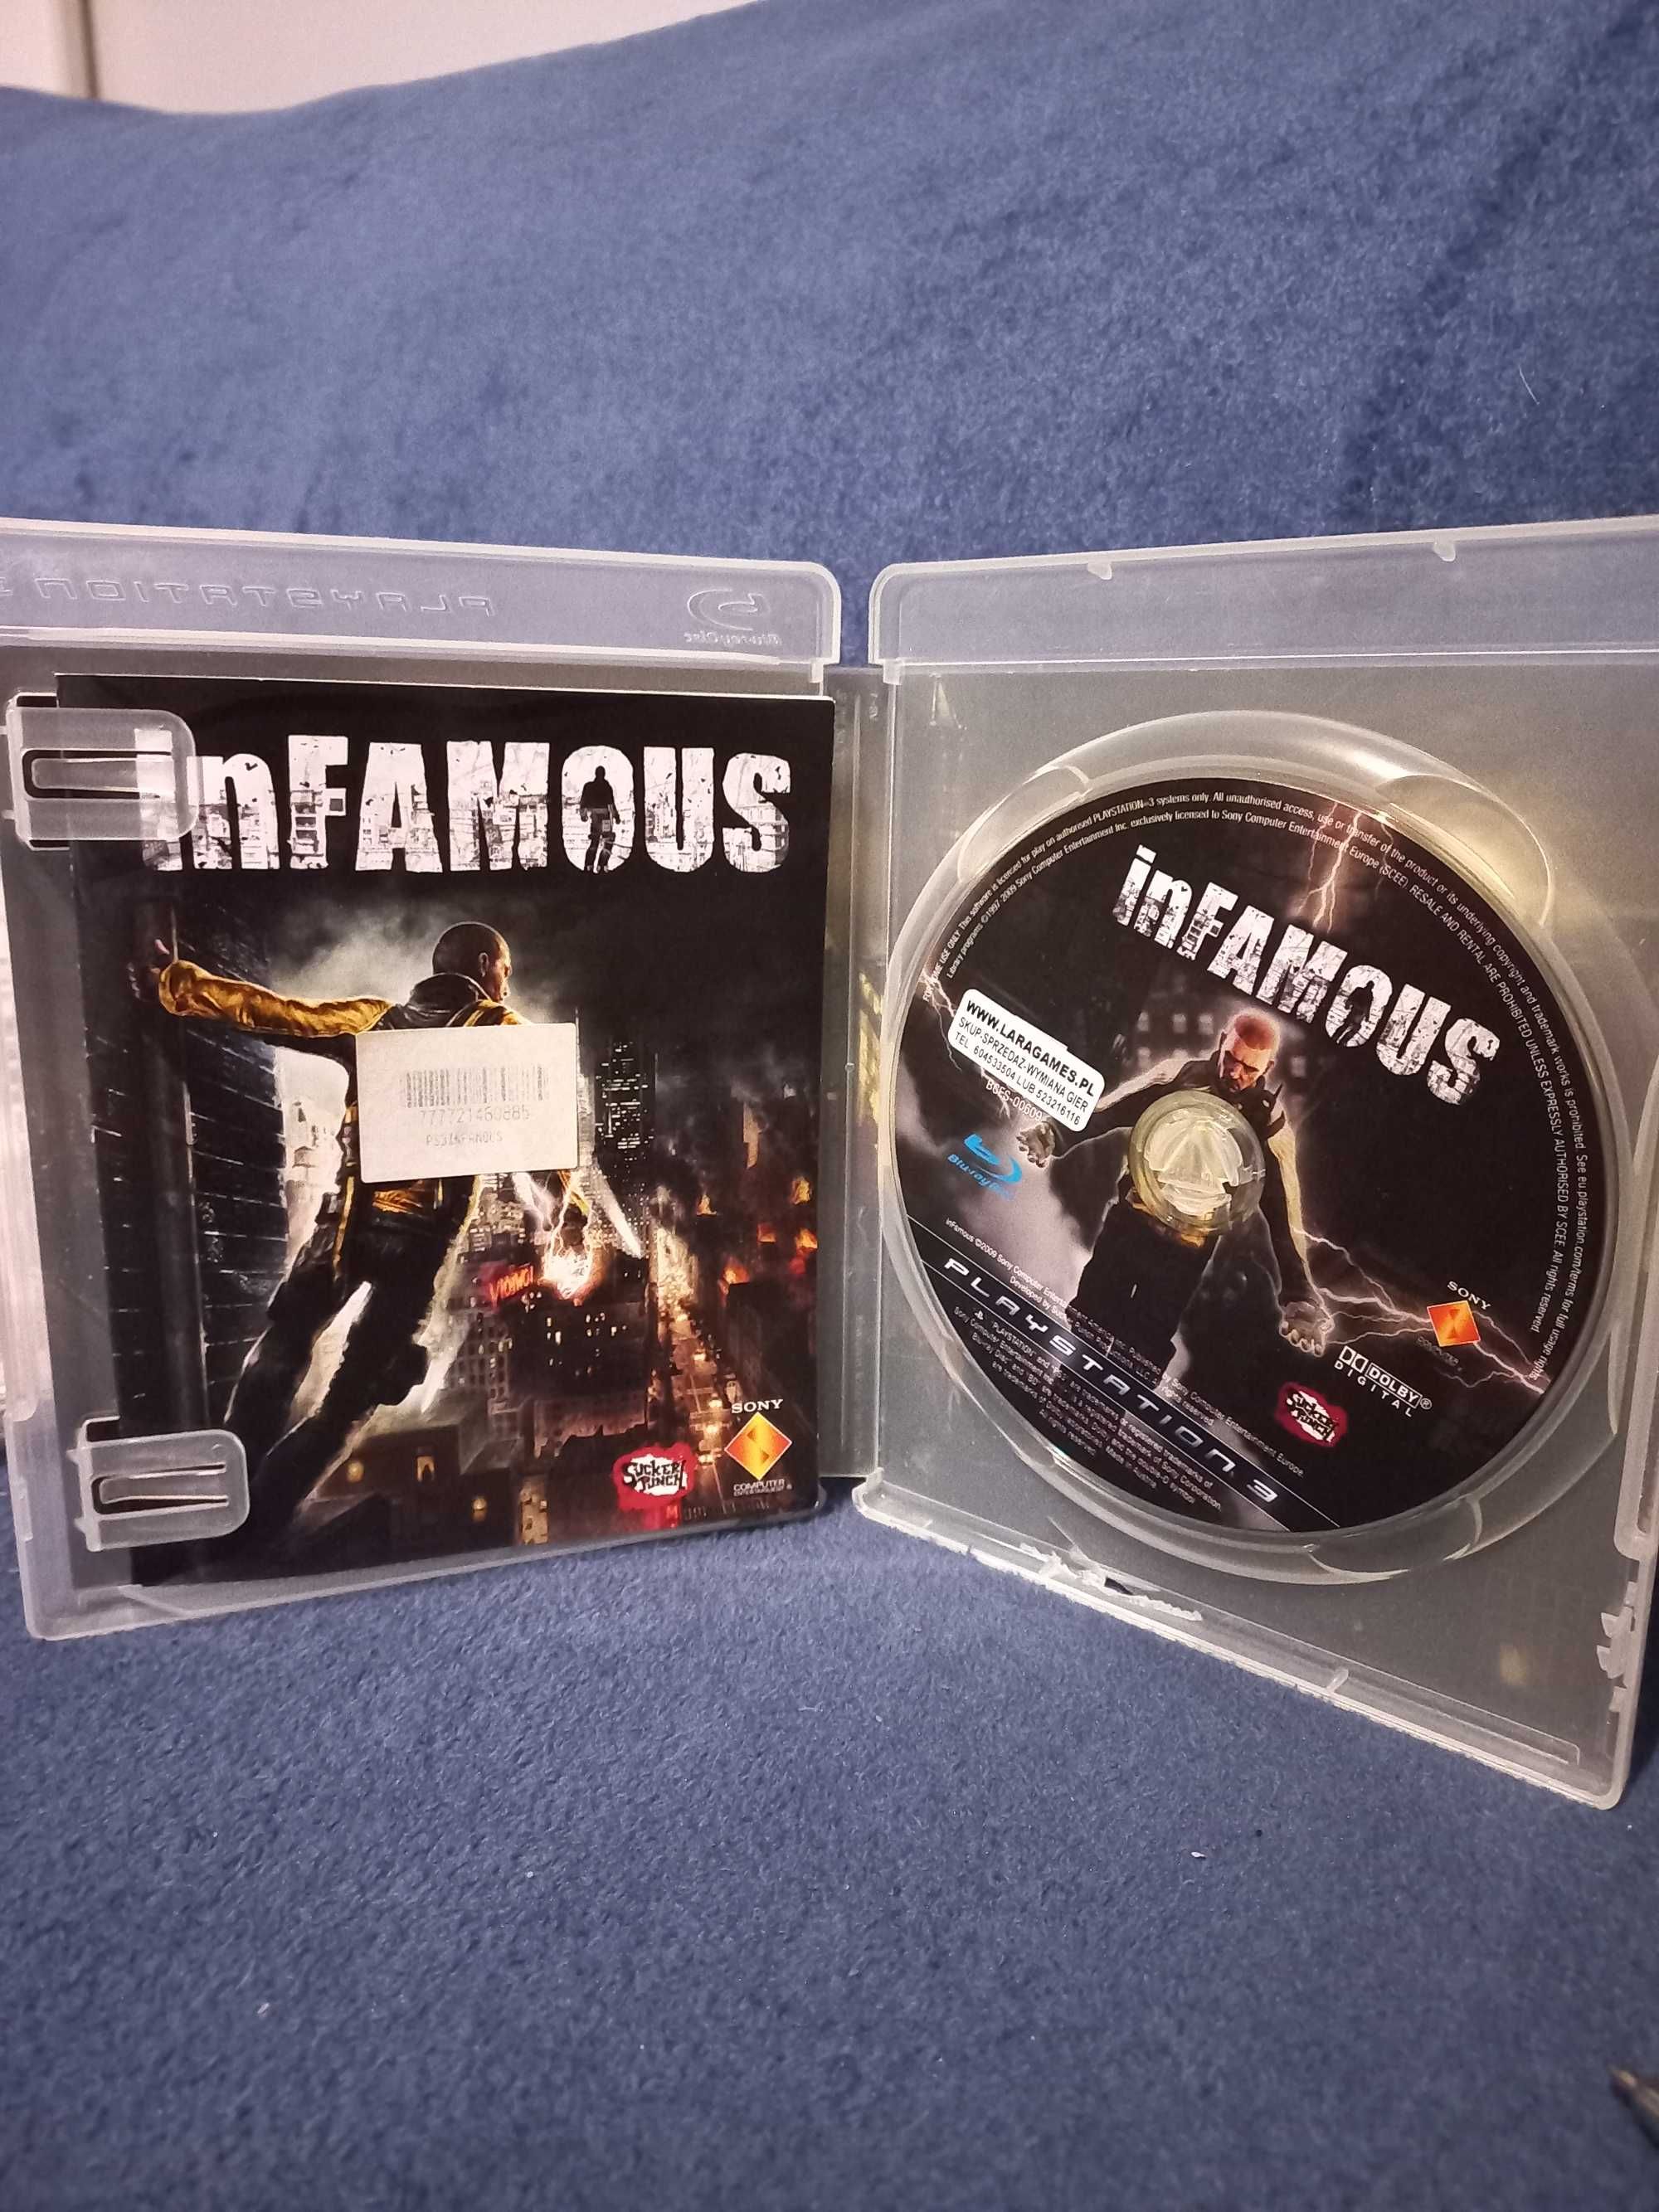 Infamous gra na PS3